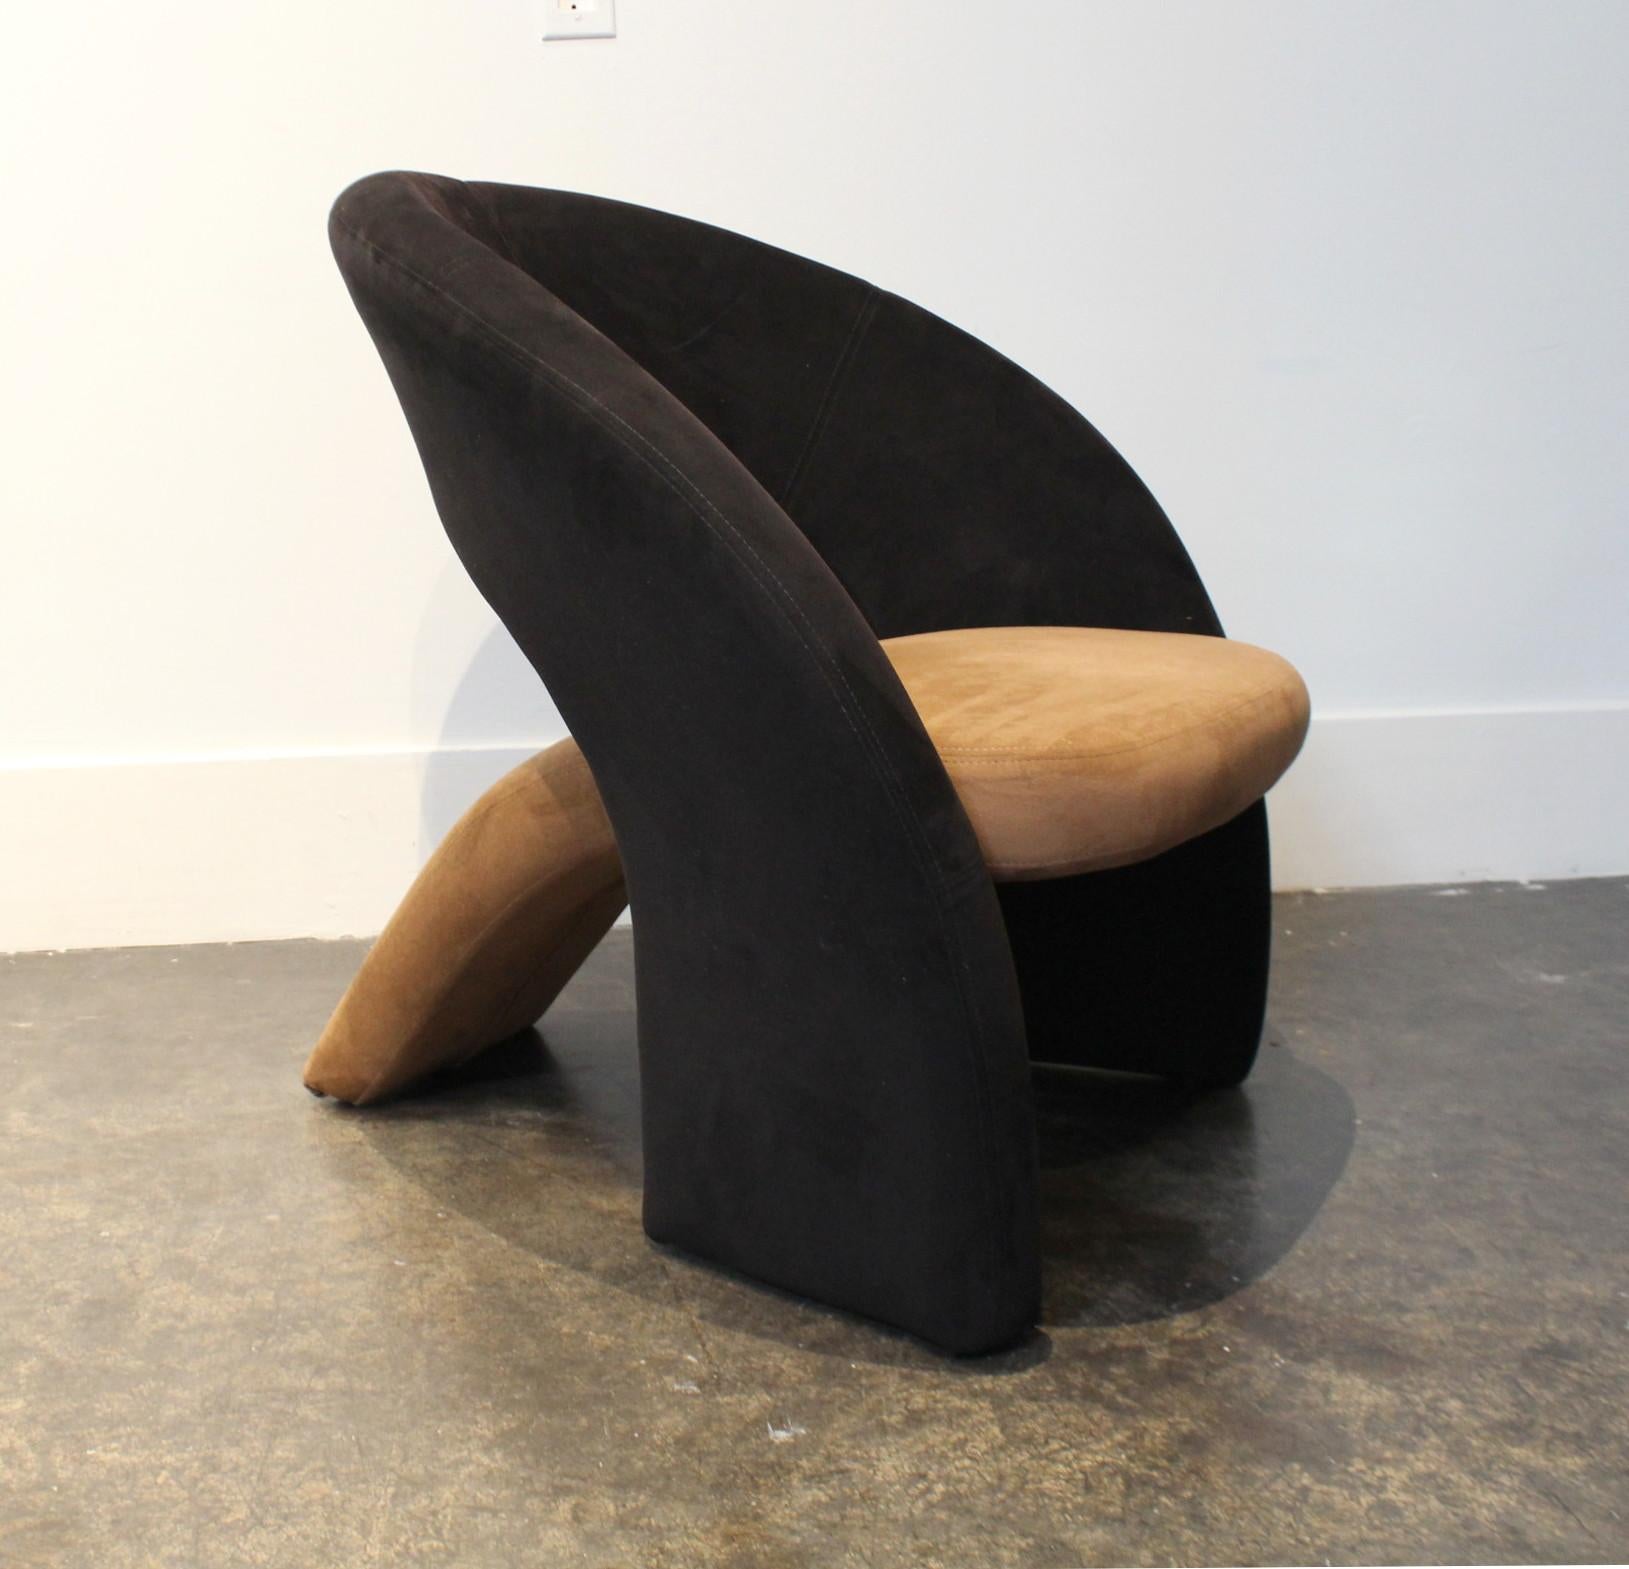 Simple yet stunning design, circa late 1980s-early 1990s lounge chair, unmarked but very much in the style of Pierre Paulin or Olivier Morgue. Back support and sides are composed of one element in dark brown micro-suede, seat and foot are a separate